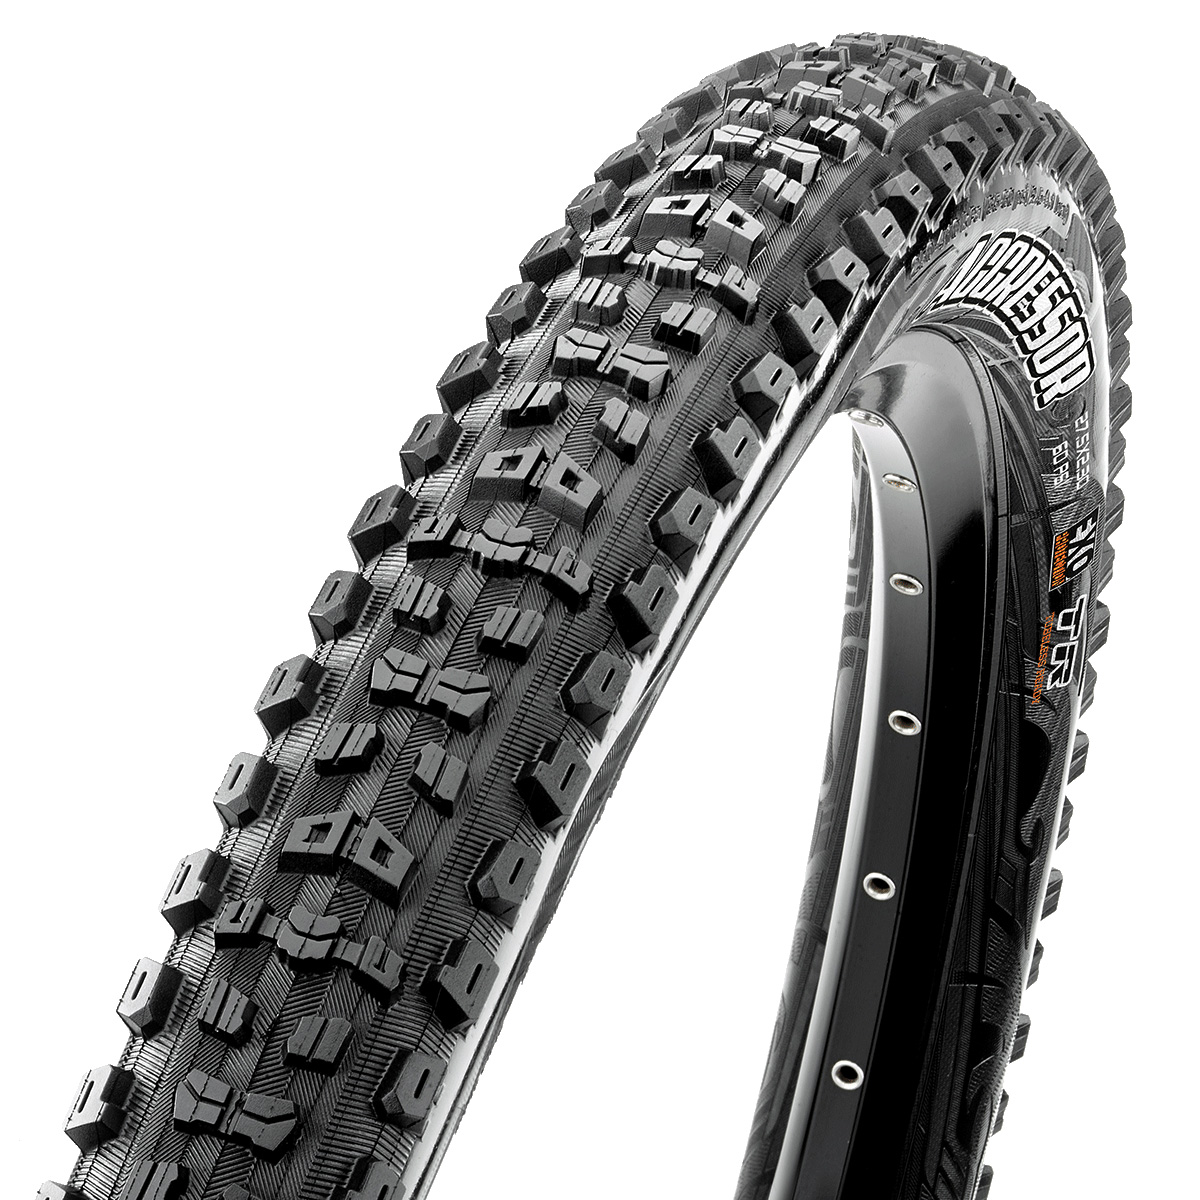 Maxxis Aggressor 29x2.50 WT Tubeless Ready, Double Down